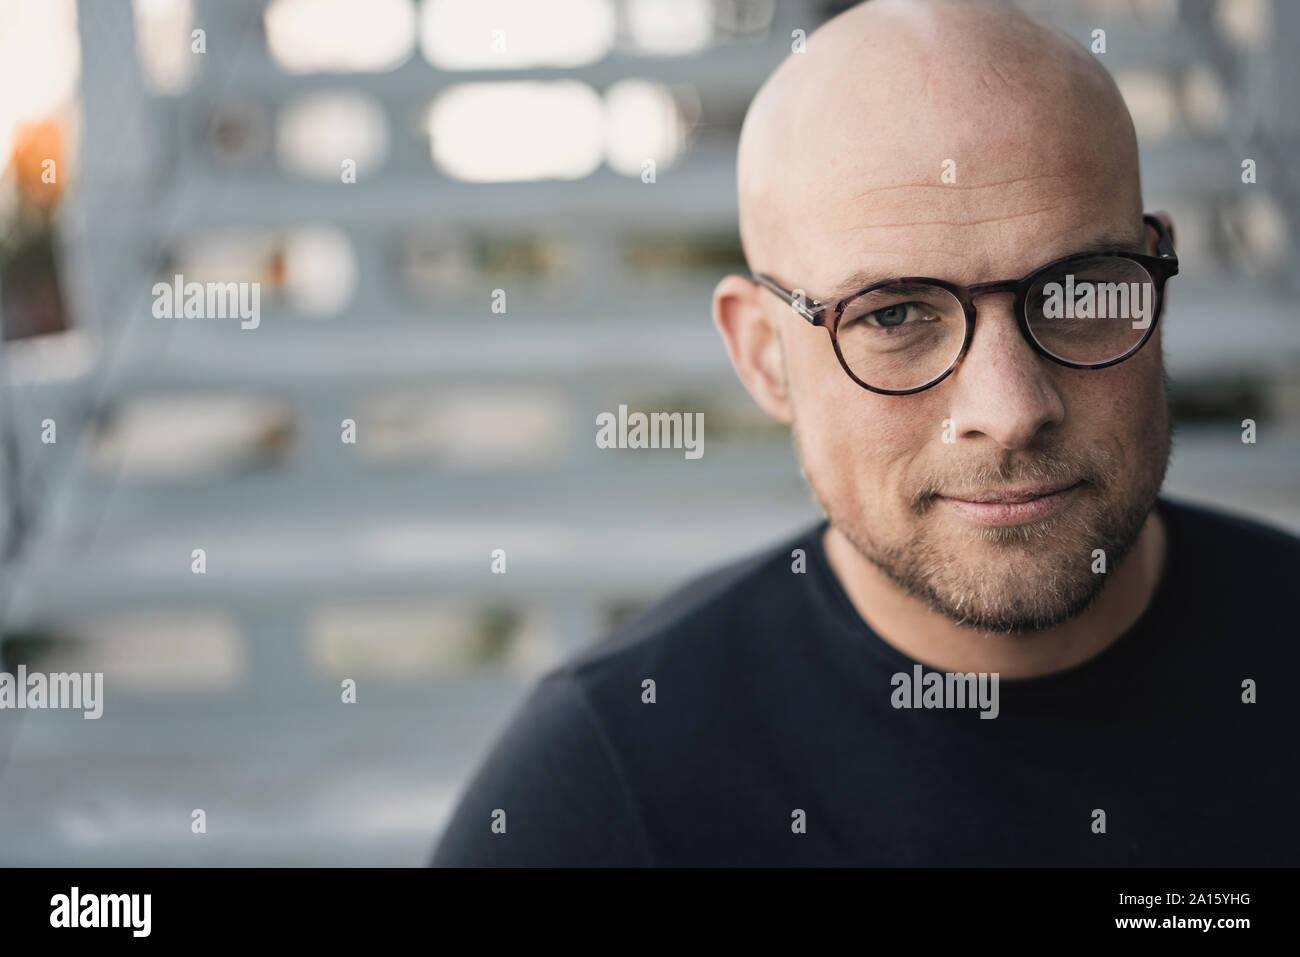 Portrait of bald man with beard wearing glasses Stock Photo